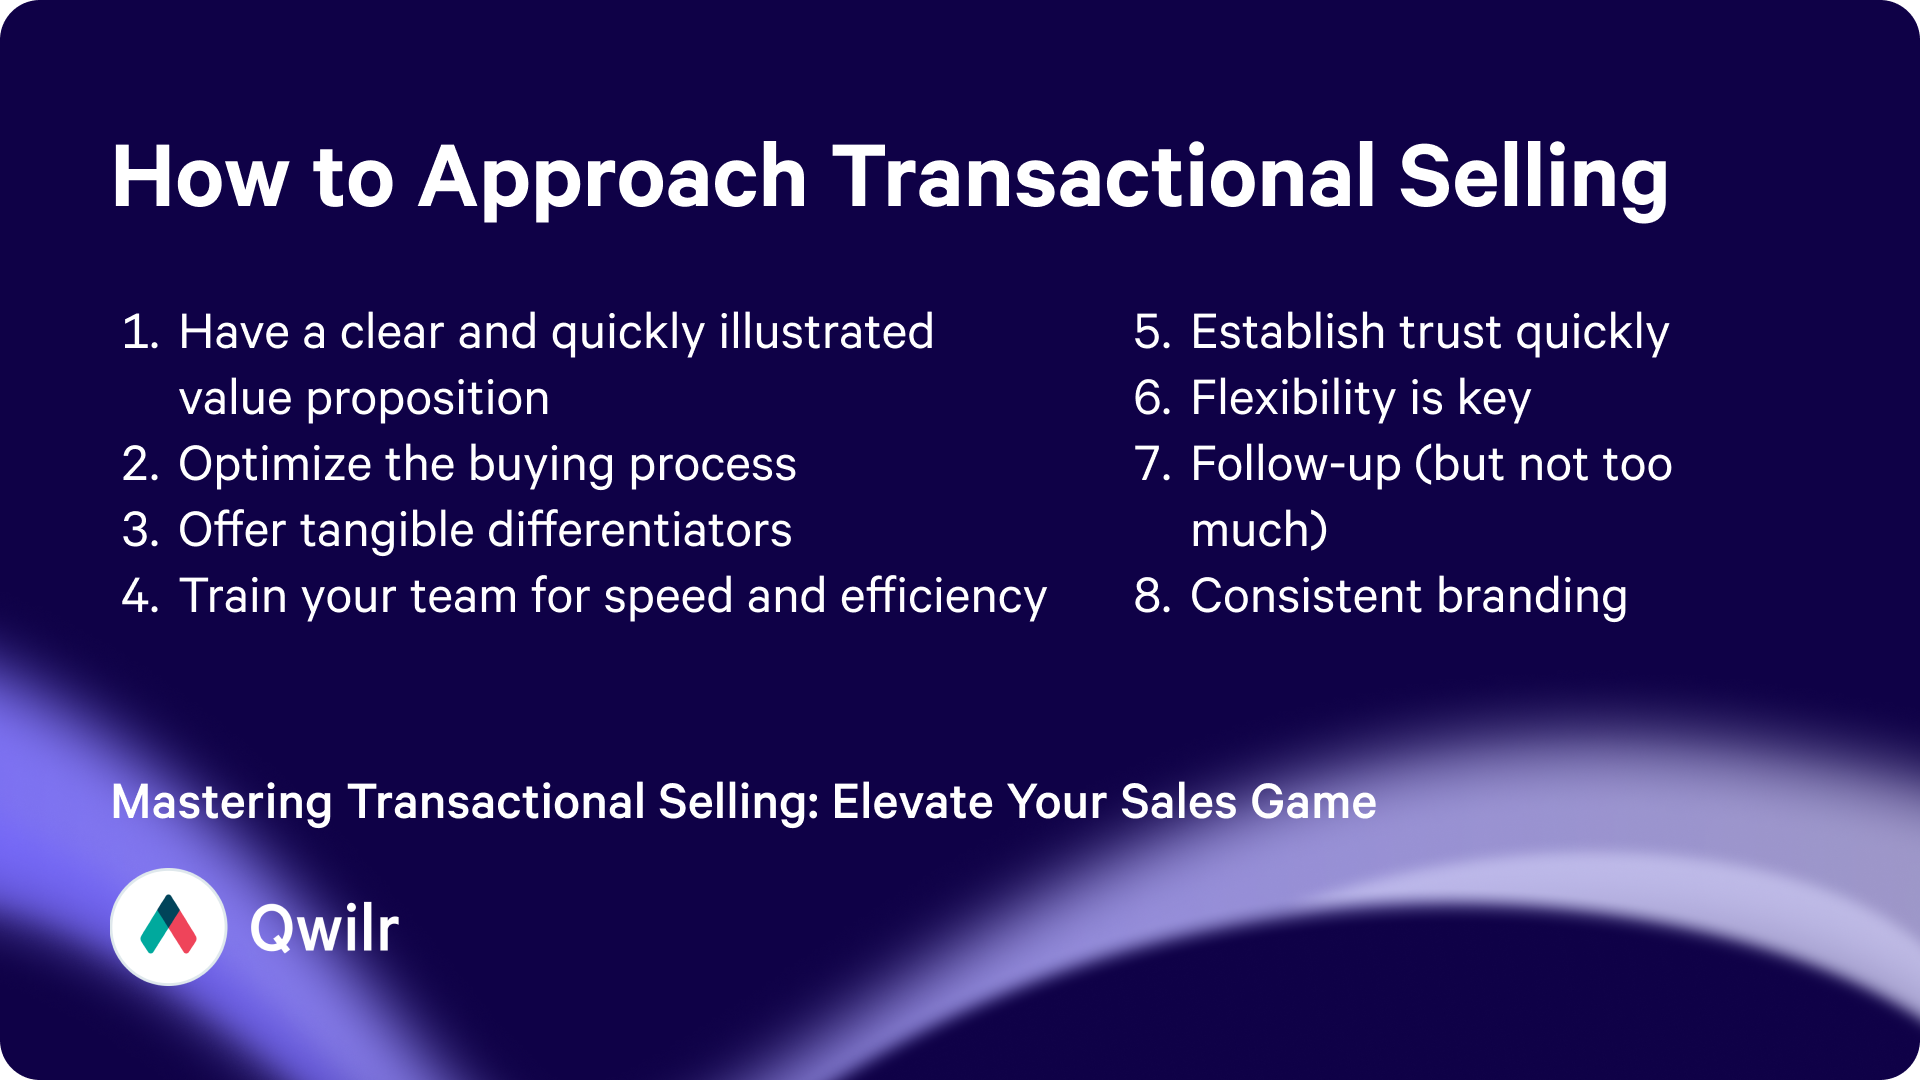 Summary of How to Approach Transactional Selling